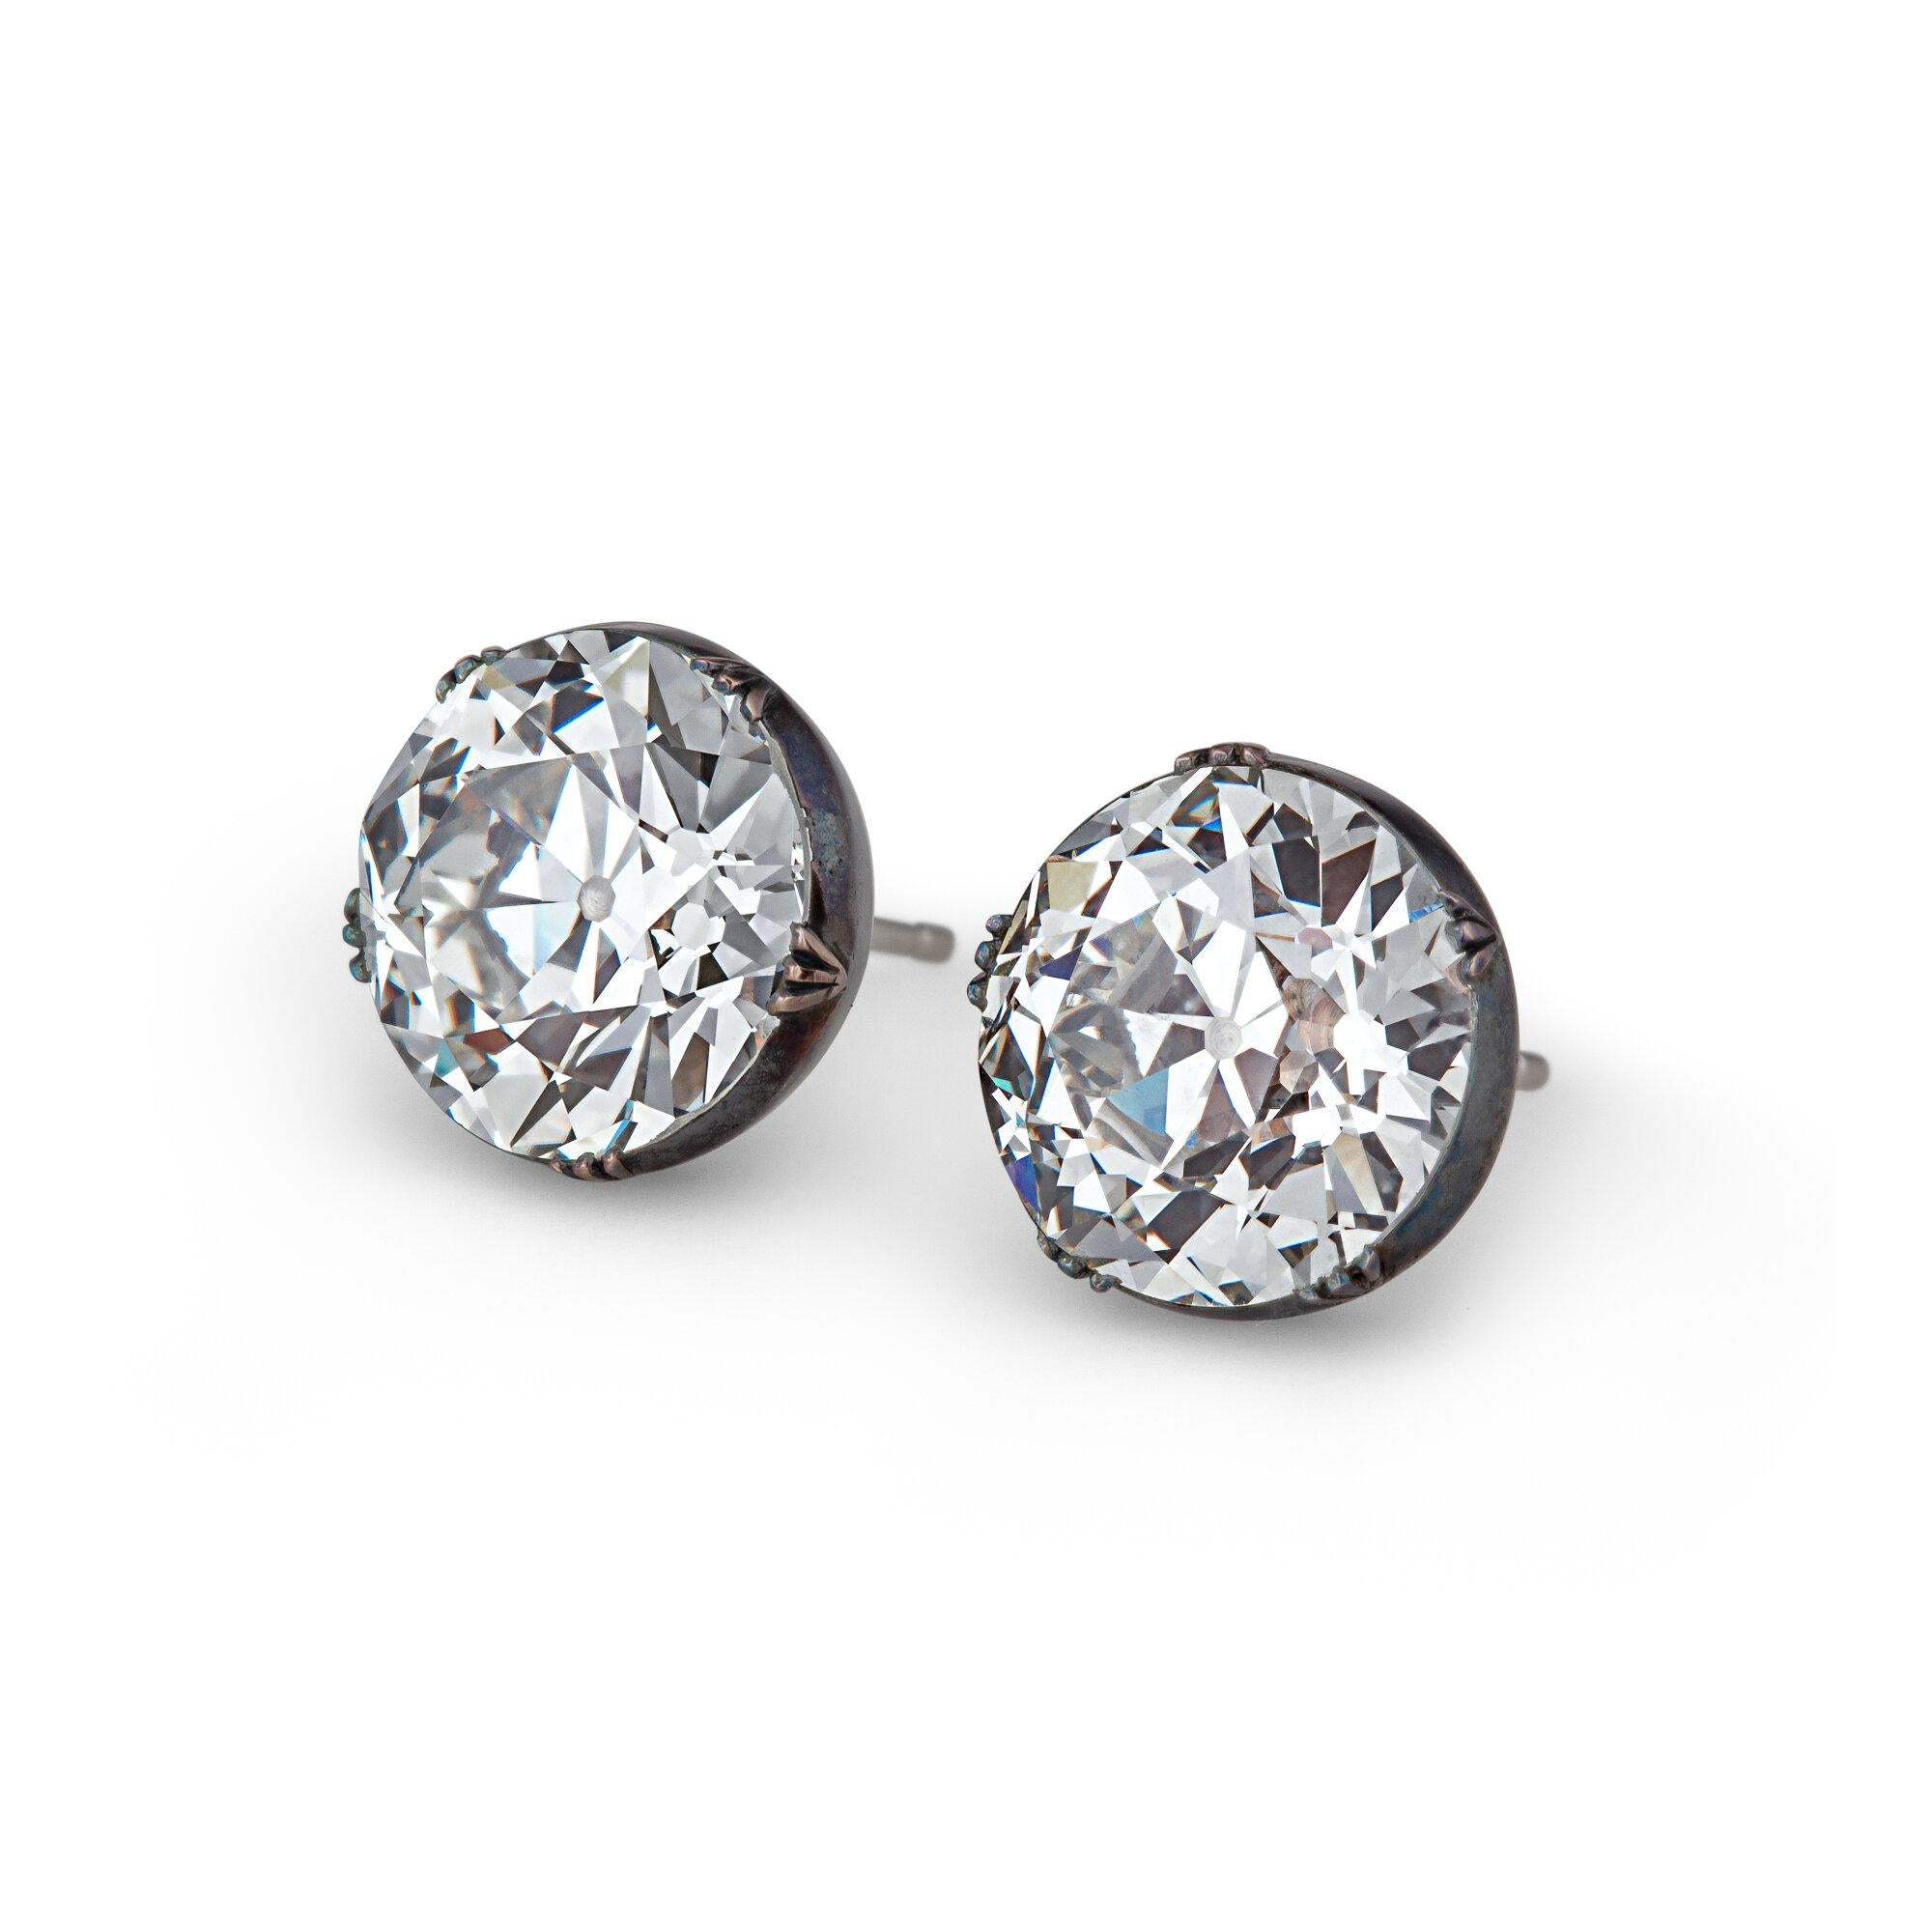 Light yourself up with these fiery and fun oversized Art Deco Old European cut diamond studs weighing a total of 12.42 carats.   Set elegantly in an antiqued silver, 18 karat rose gold, and platinum collet mounting, these one-of-a-kind earrings are